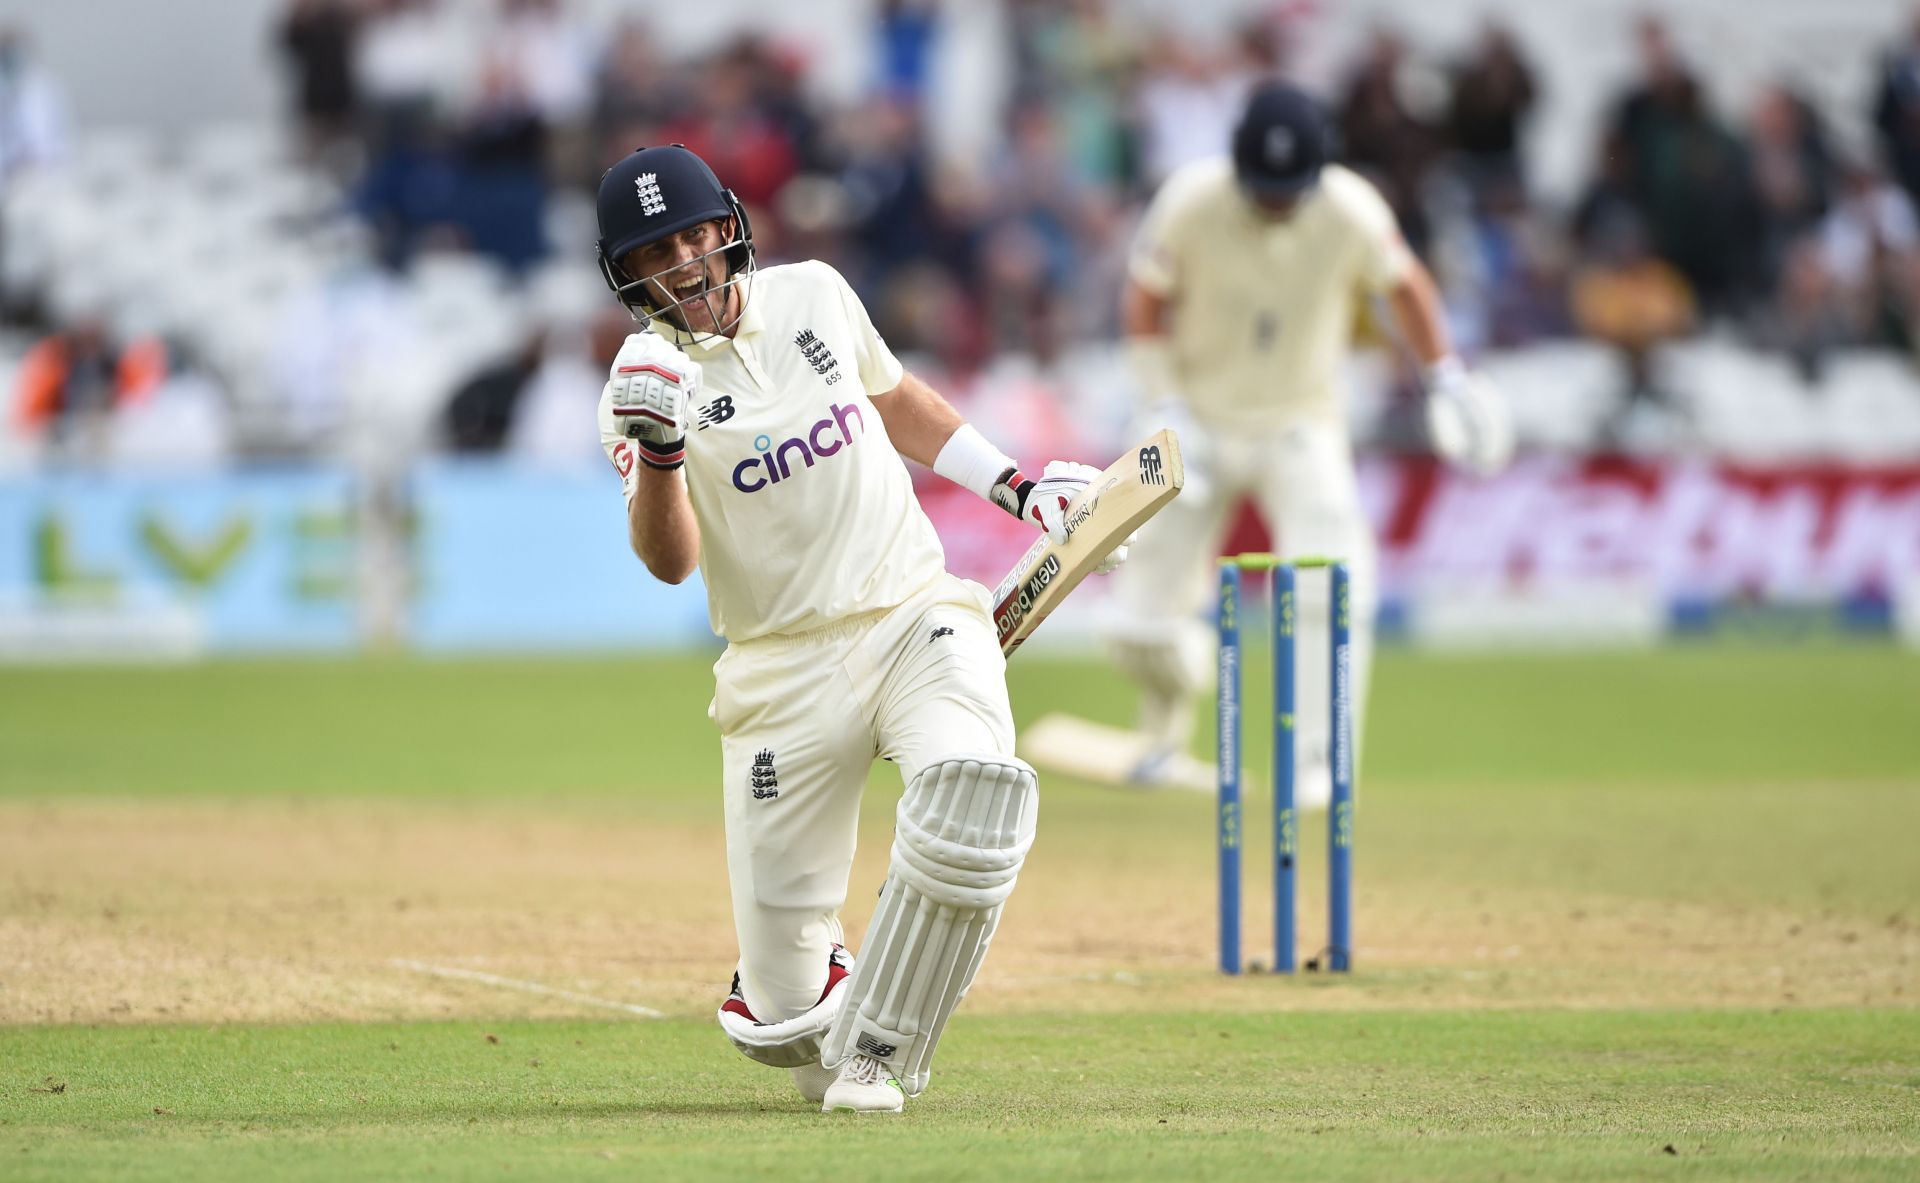 Joe Root celebrating after his Test 100 at Nottingham, 2021. (Credit: Getty Images)